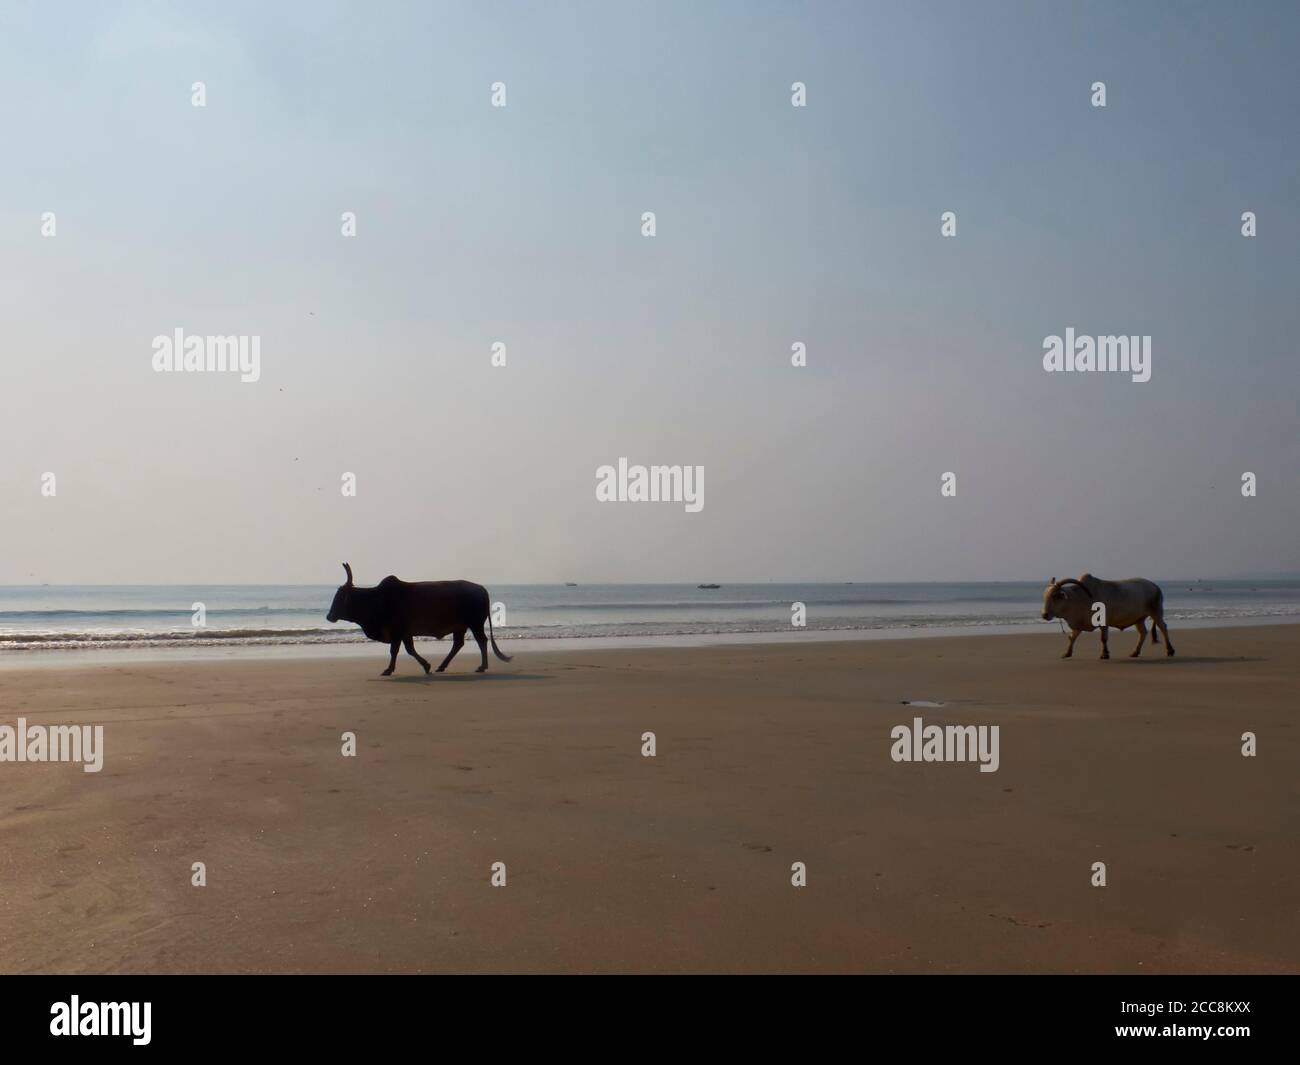 Two horned bulls walk down the sandy beach opposite the sea. Indian cow, holy cow, sacred animal. Stock Photo